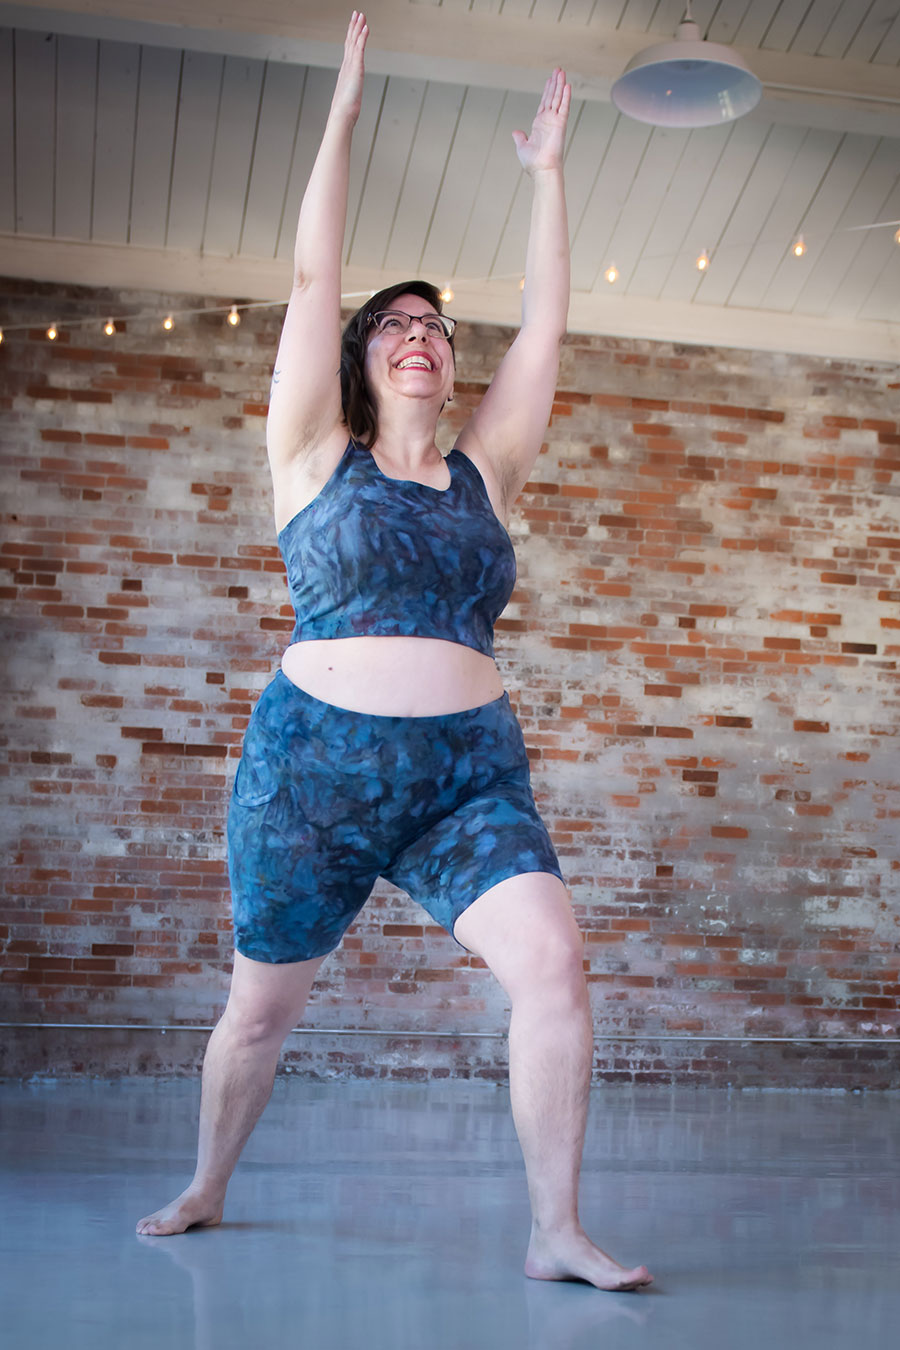 Shaerie does a yoga pose in her blue ice dyed Limestone leggings bike shorts and top